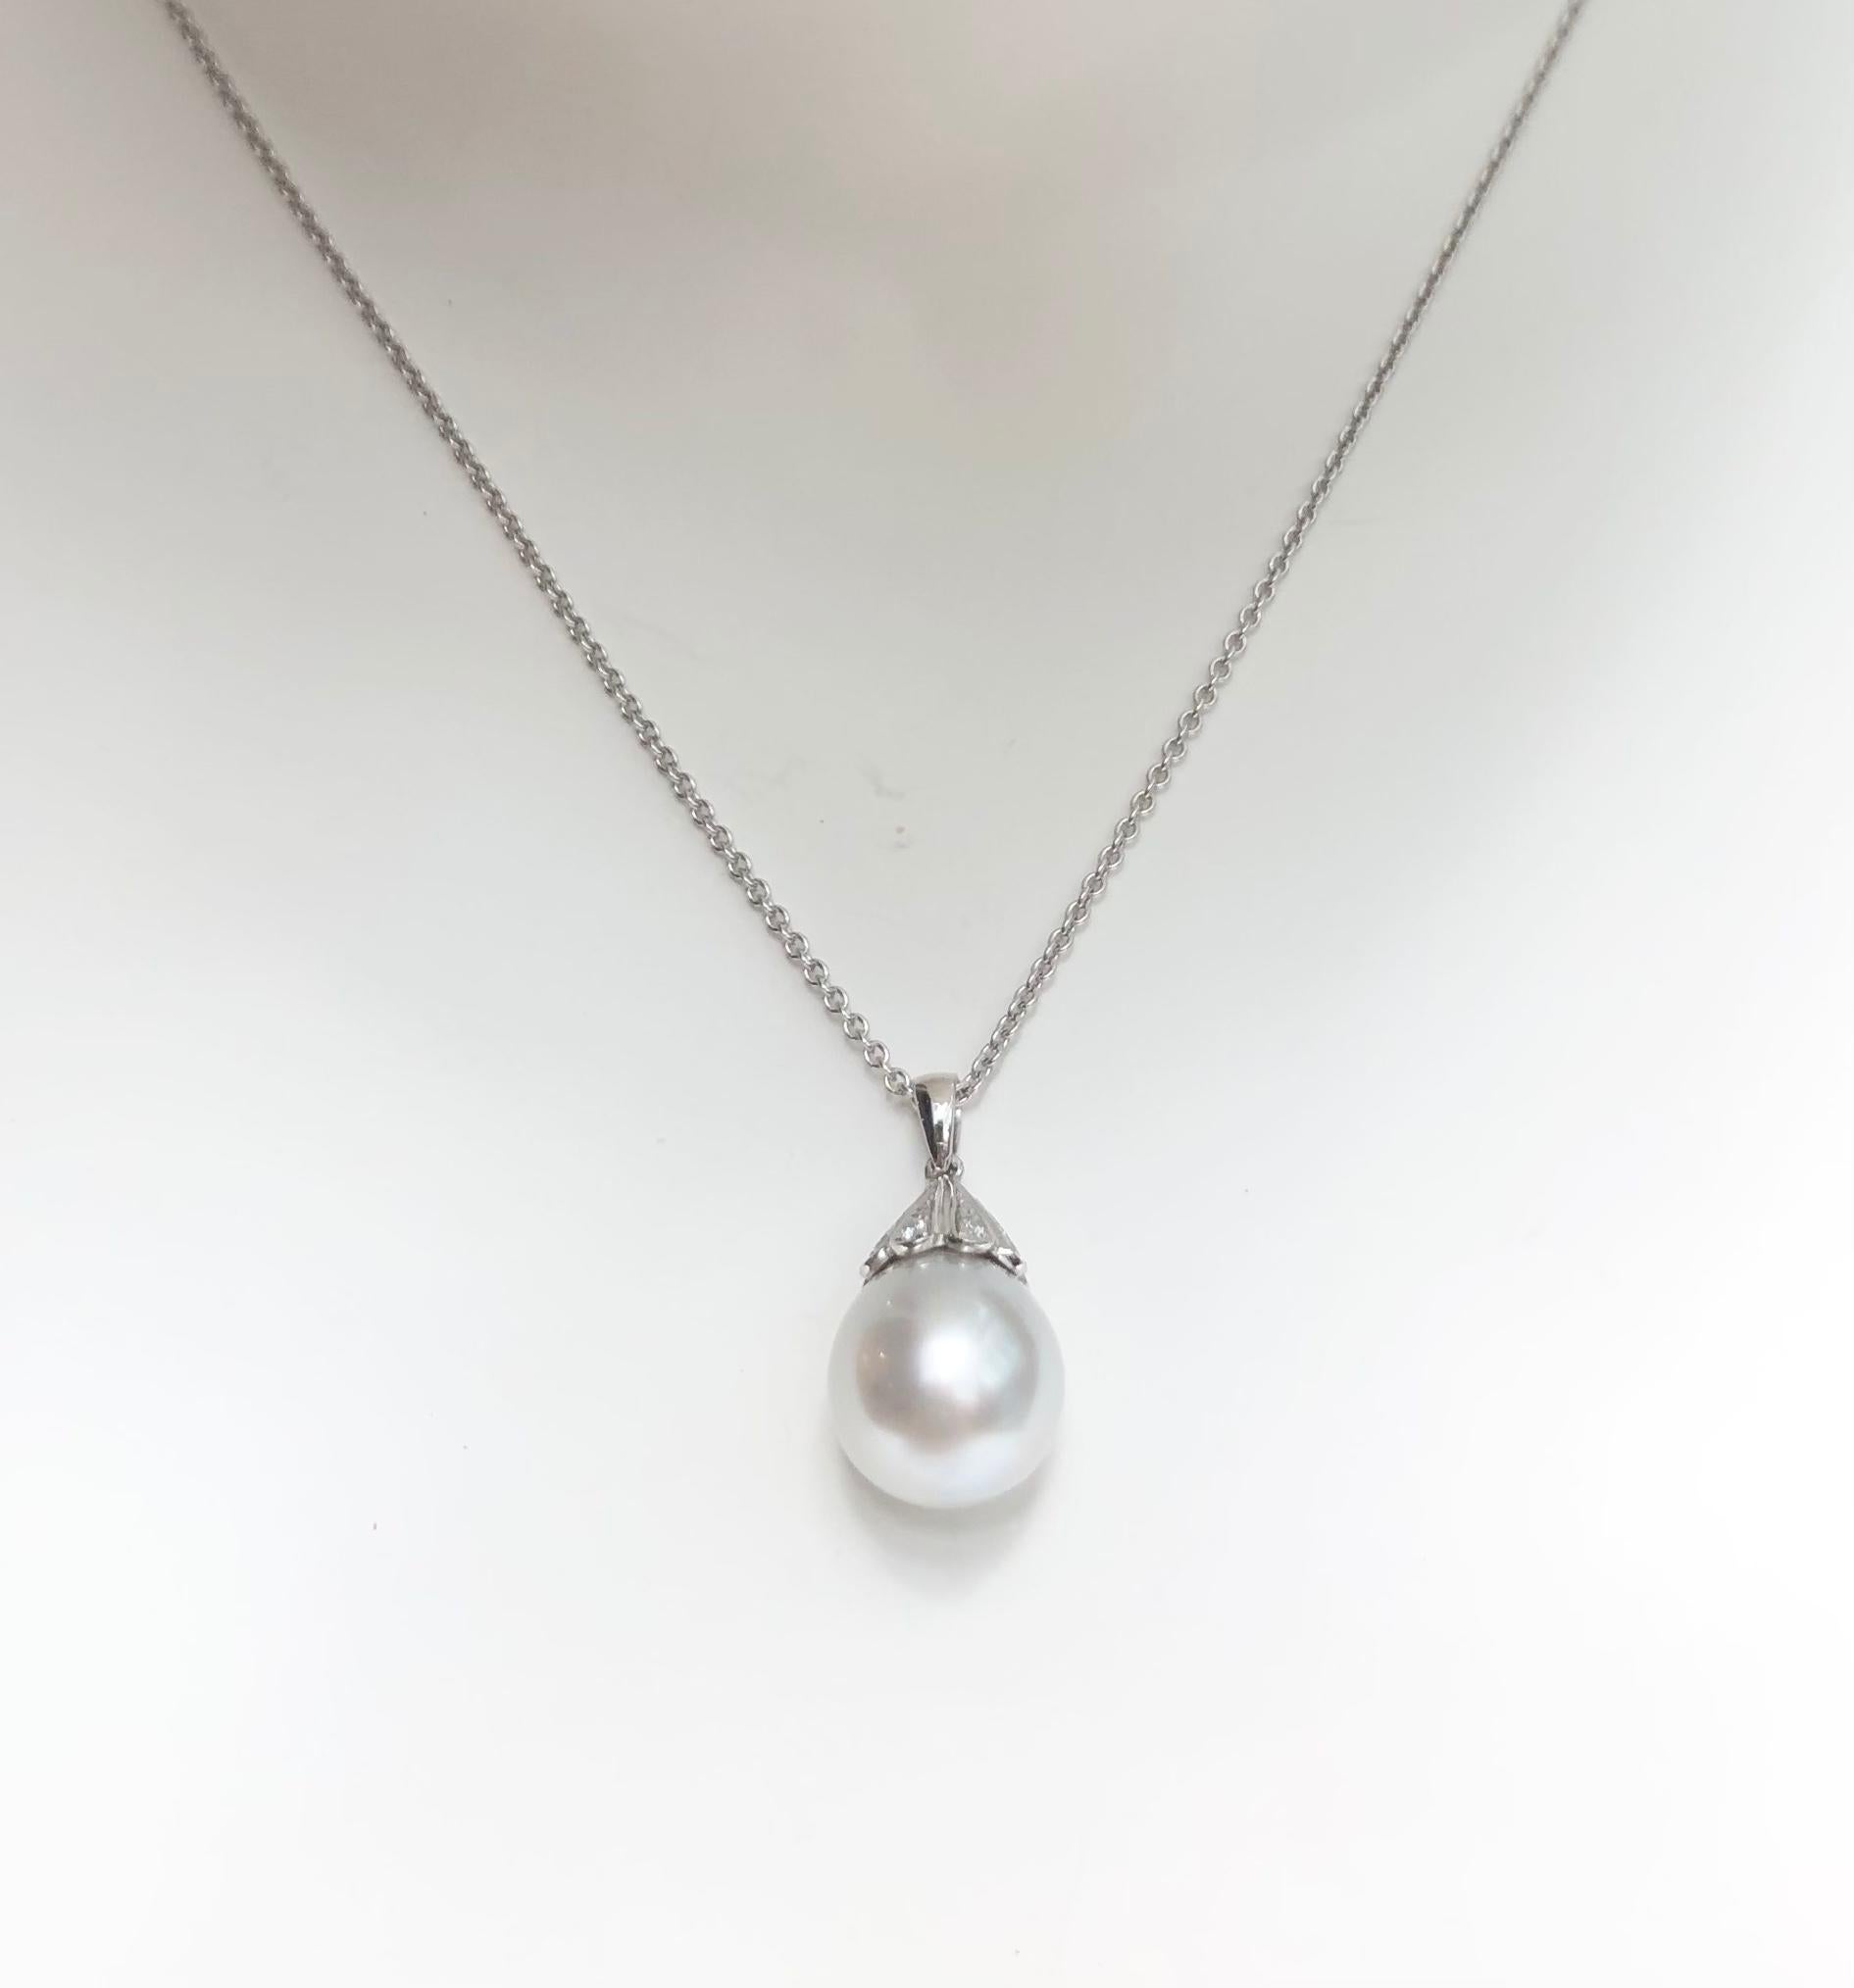 South Sea Pearl with Diamond 0.03 carat Pendant set in 18 Karat White Gold Settings
(chain not included)

Width:  1.0 cm 
Length: 2.0 cm
Total Weight: 2.94 grams

